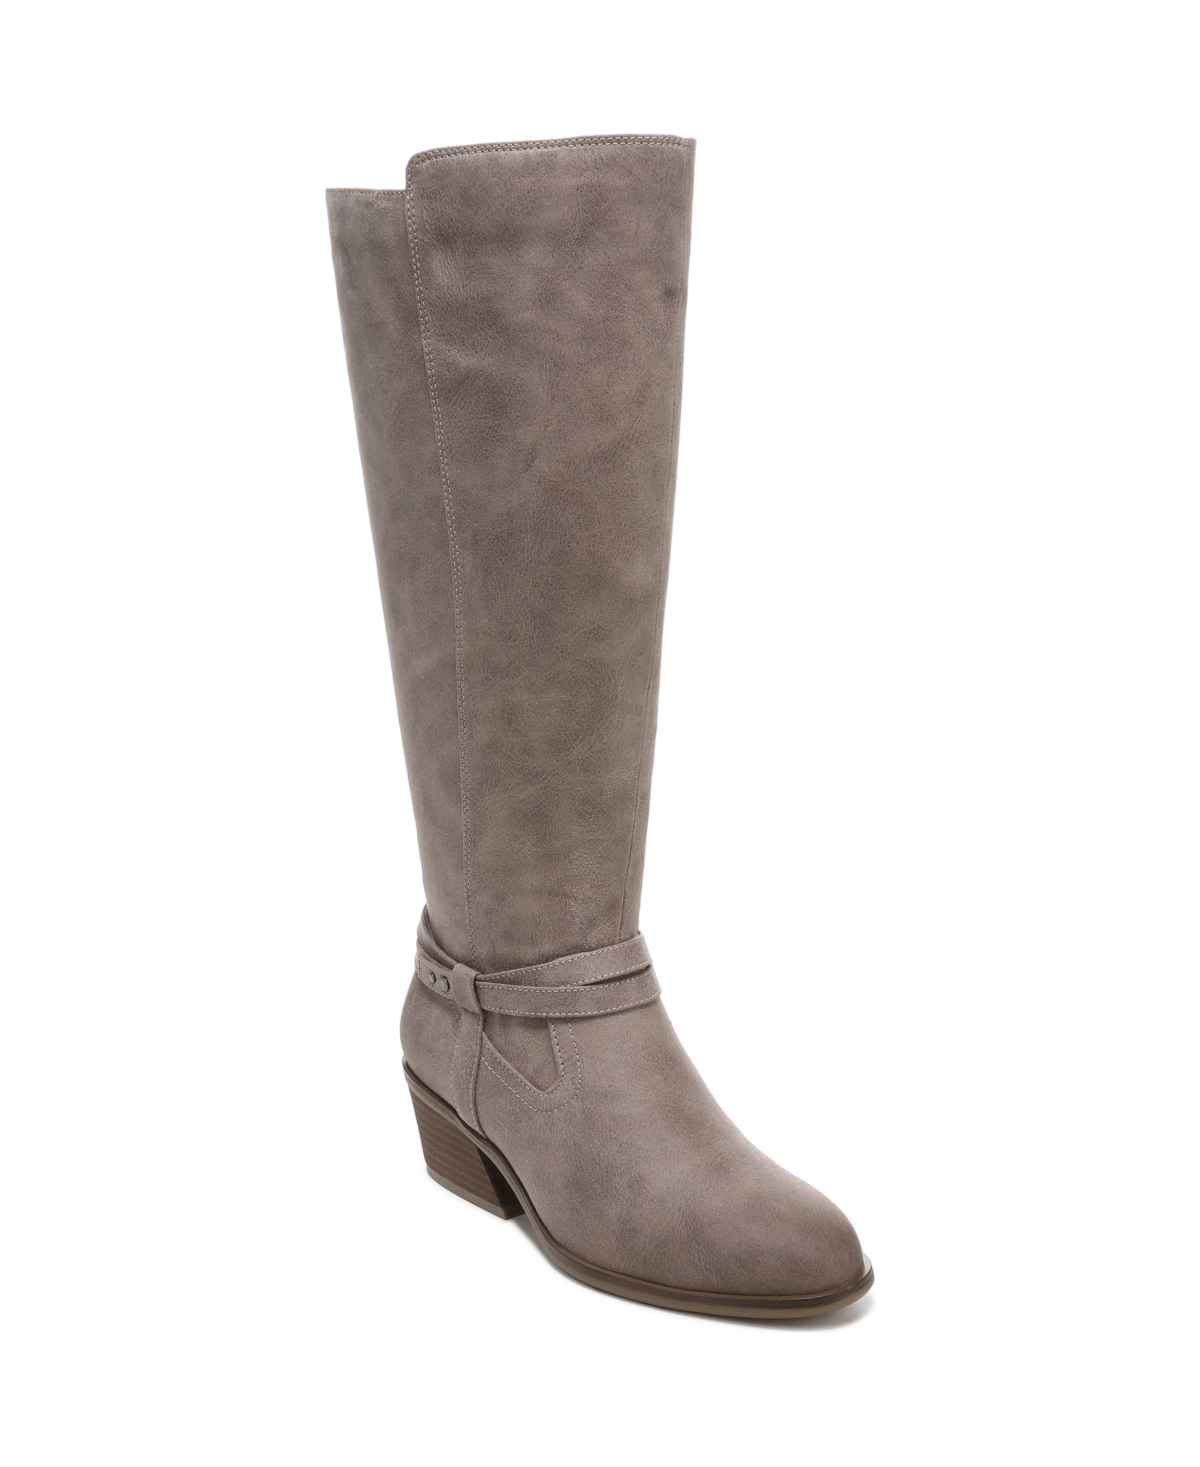 UPC 727687179705 product image for Dr. Scholl's Women's Liberate Wide Calf High Shaft Boots Women's Shoes | upcitemdb.com